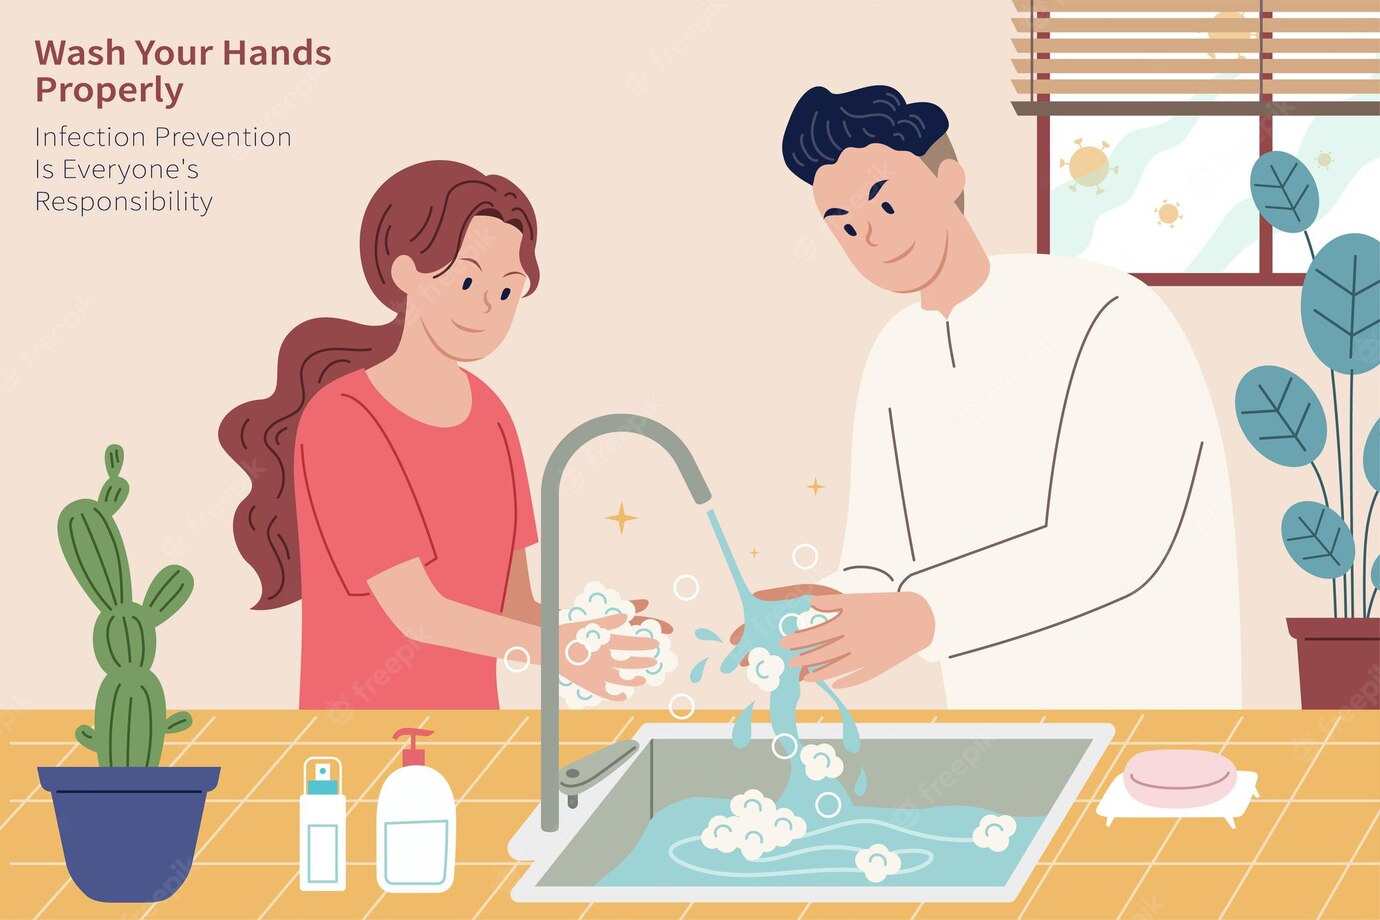 Image of person washing hands